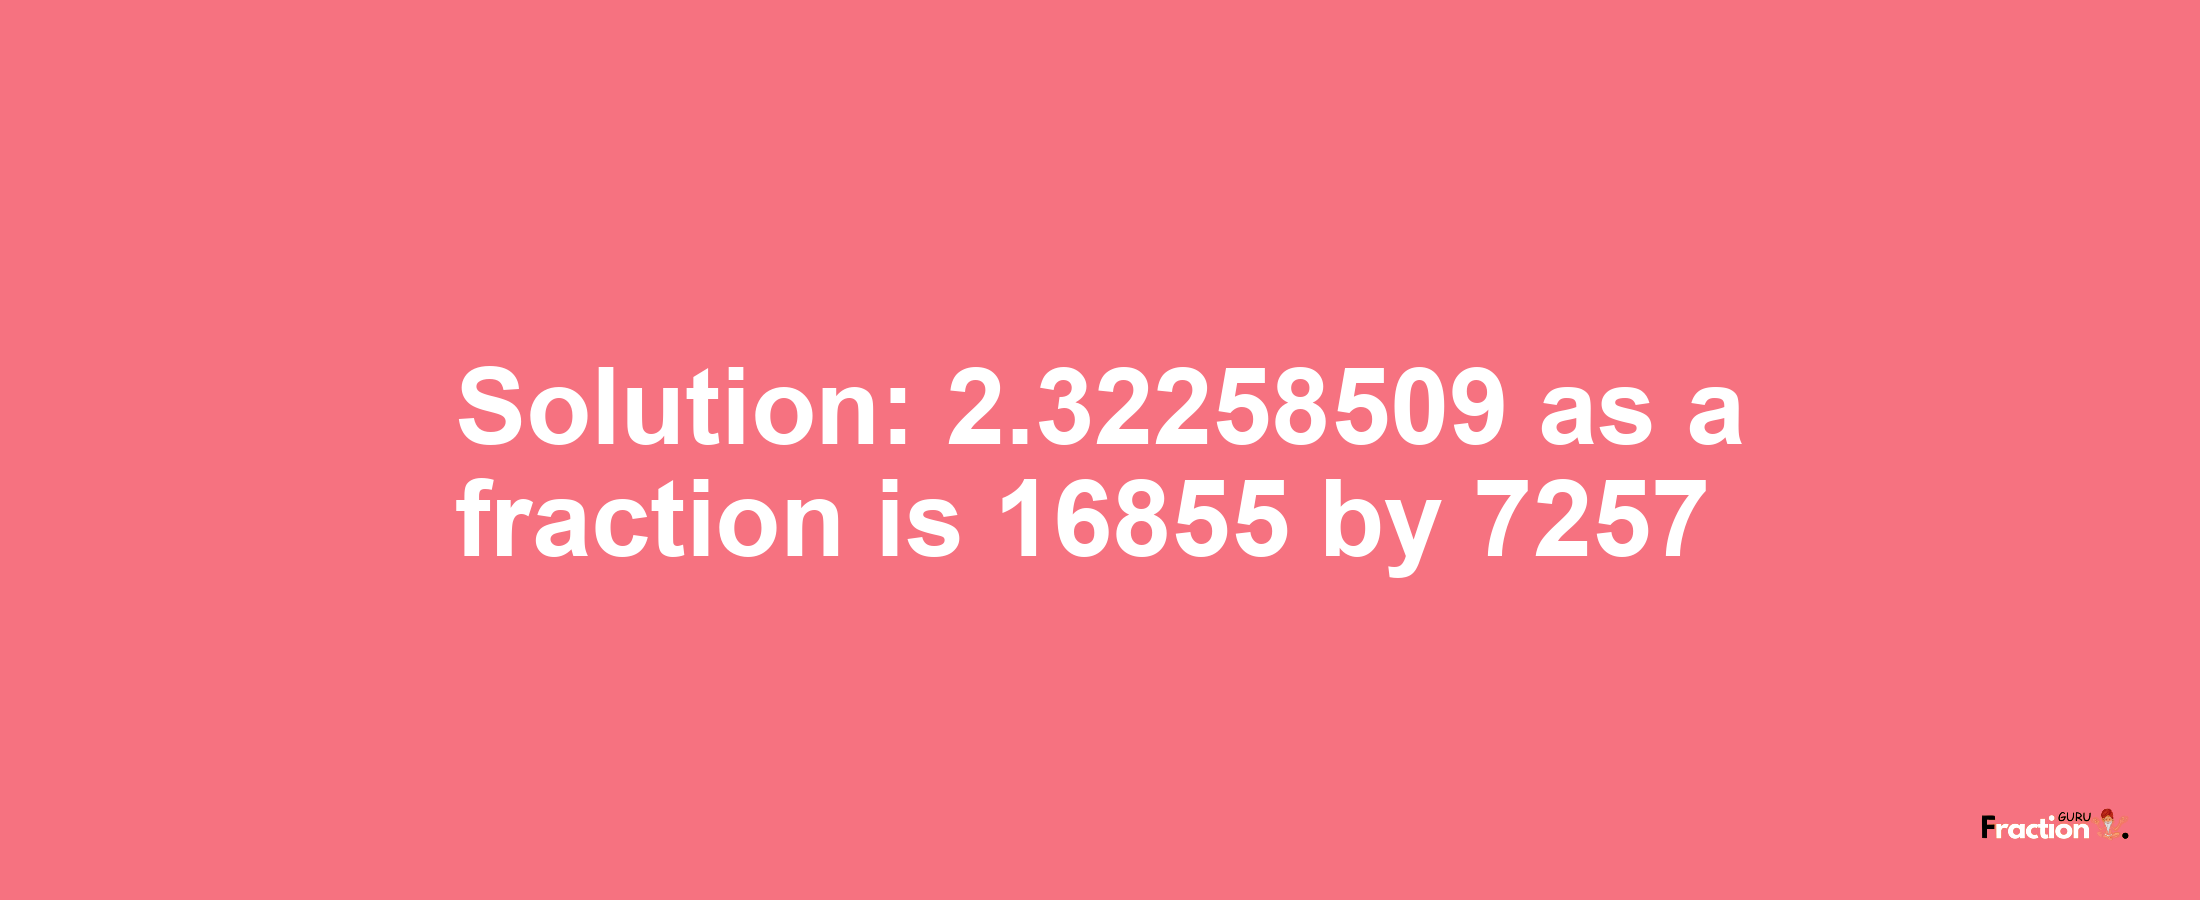 Solution:2.32258509 as a fraction is 16855/7257